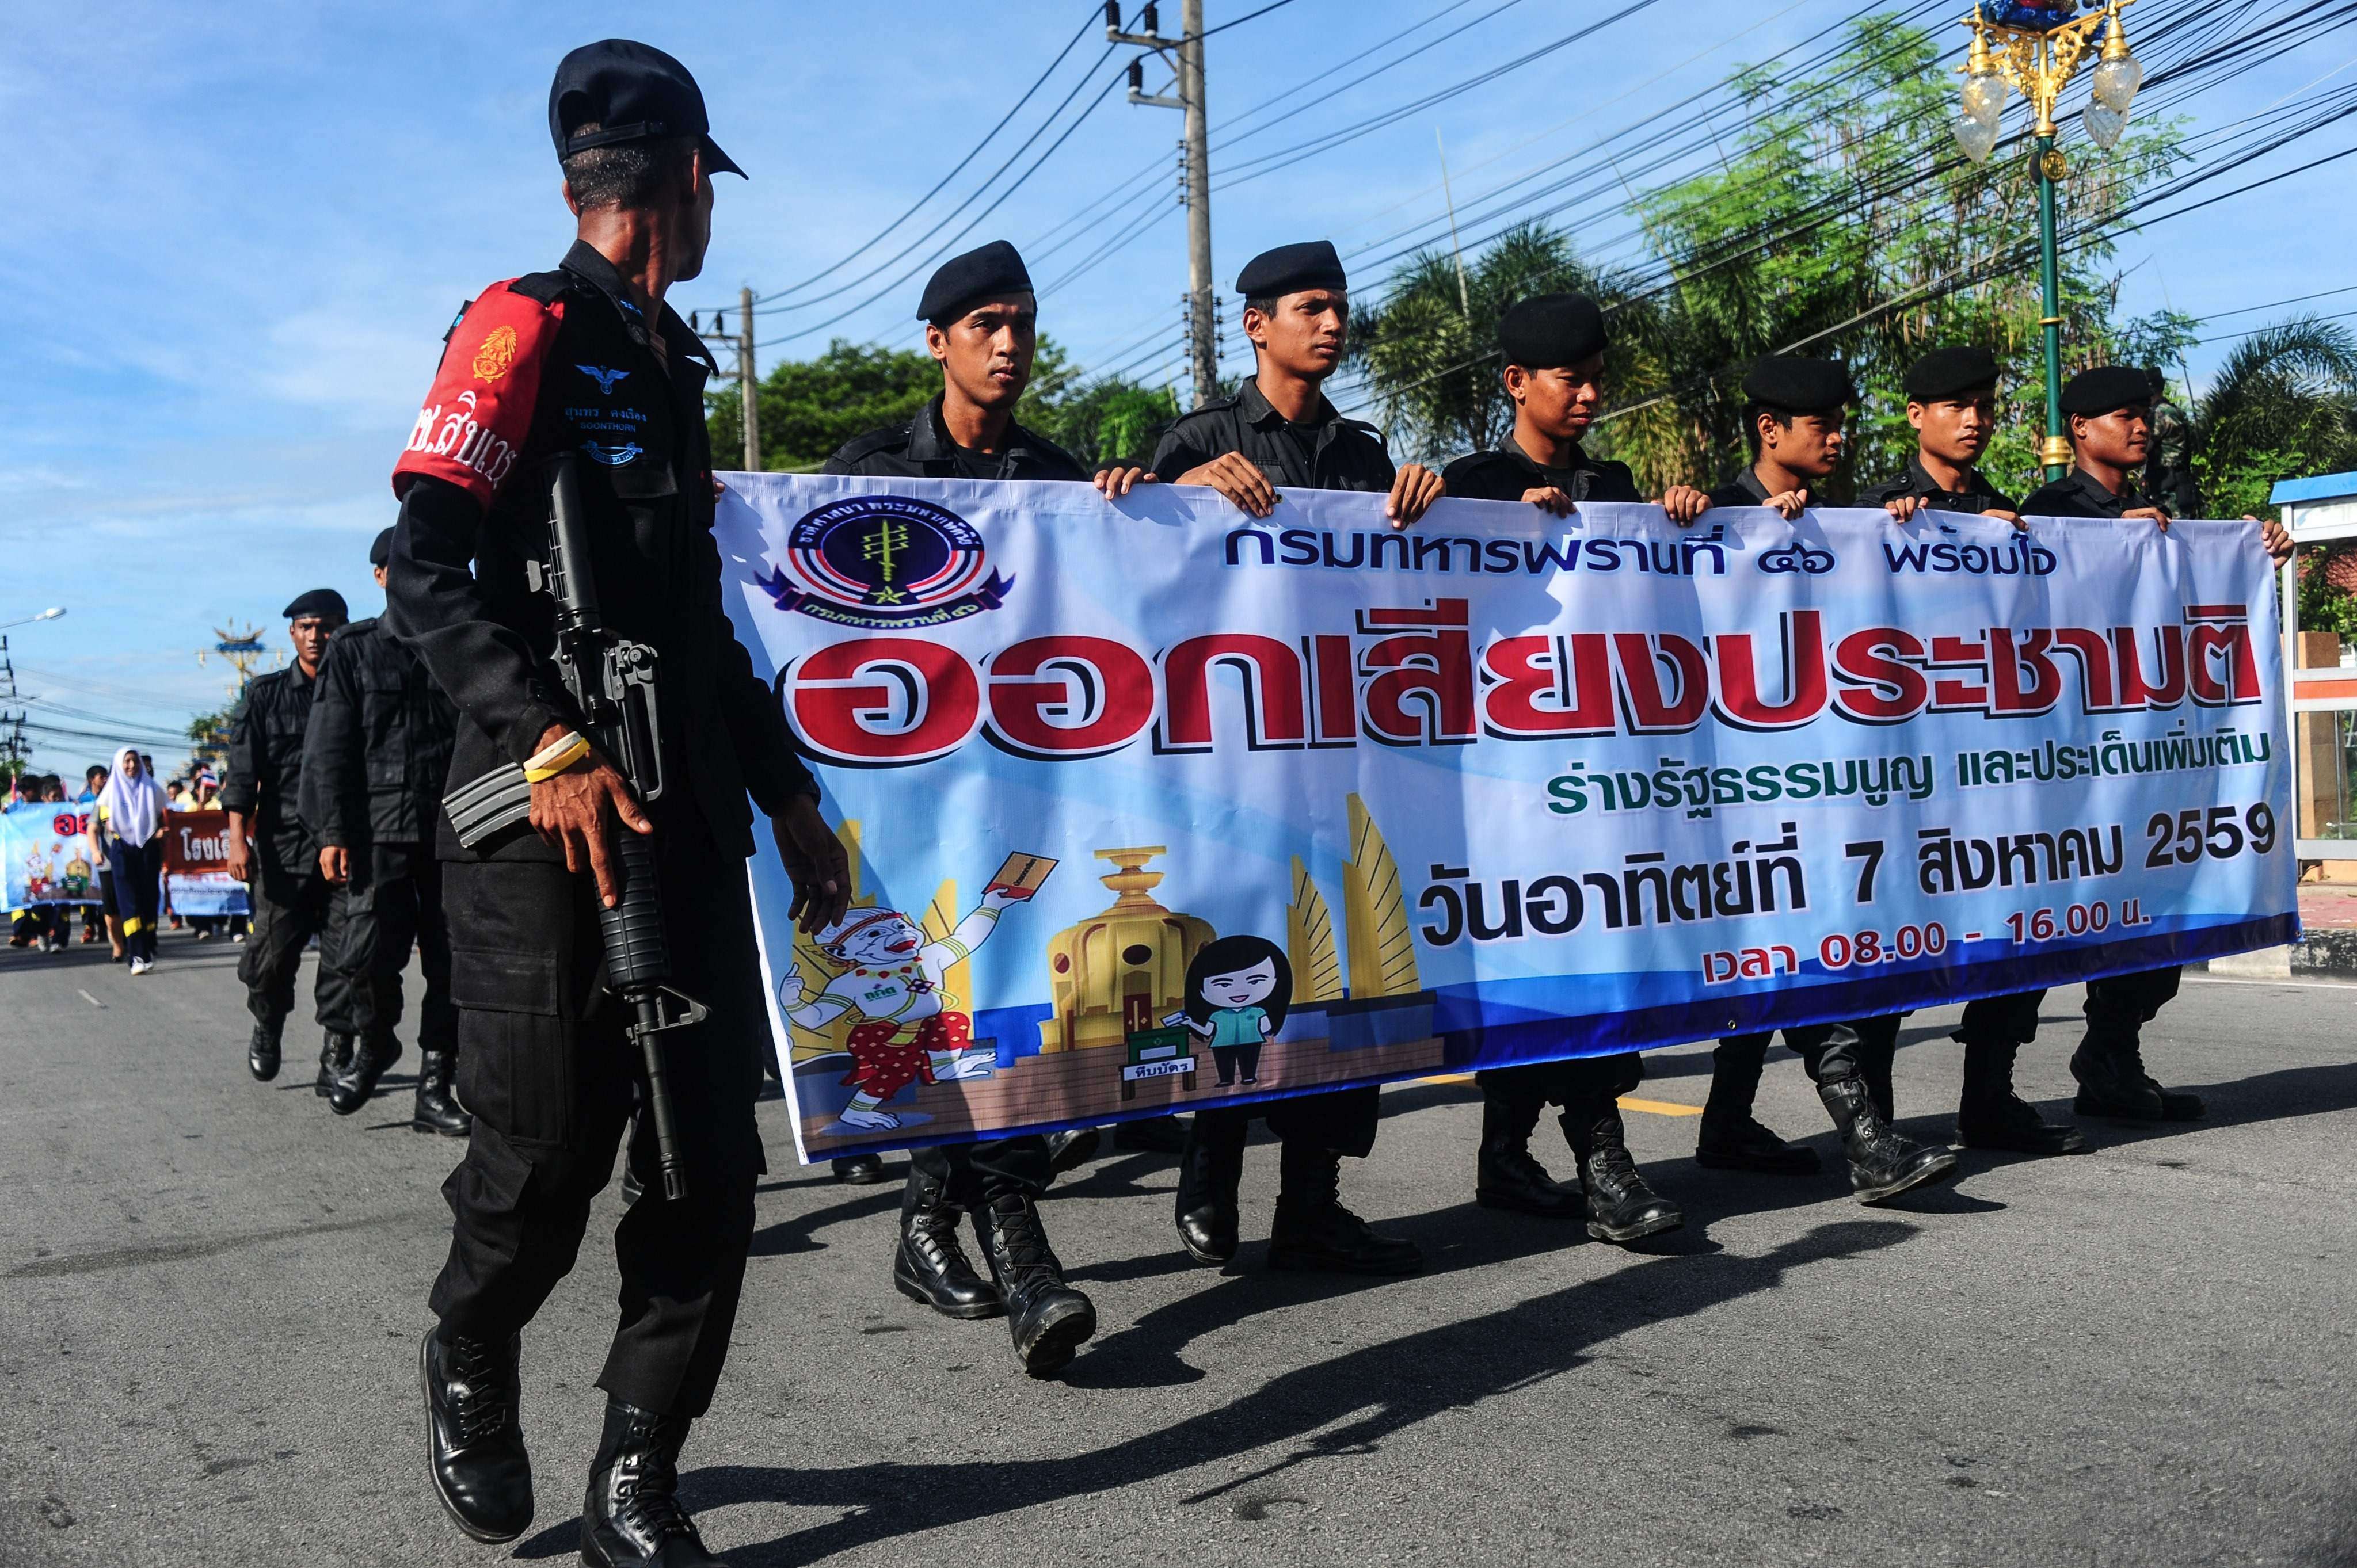 Thai soldiers march as part of a campaign encouraging the public to vote in the referendum on Thailand's draft constitution. Photo: AFP